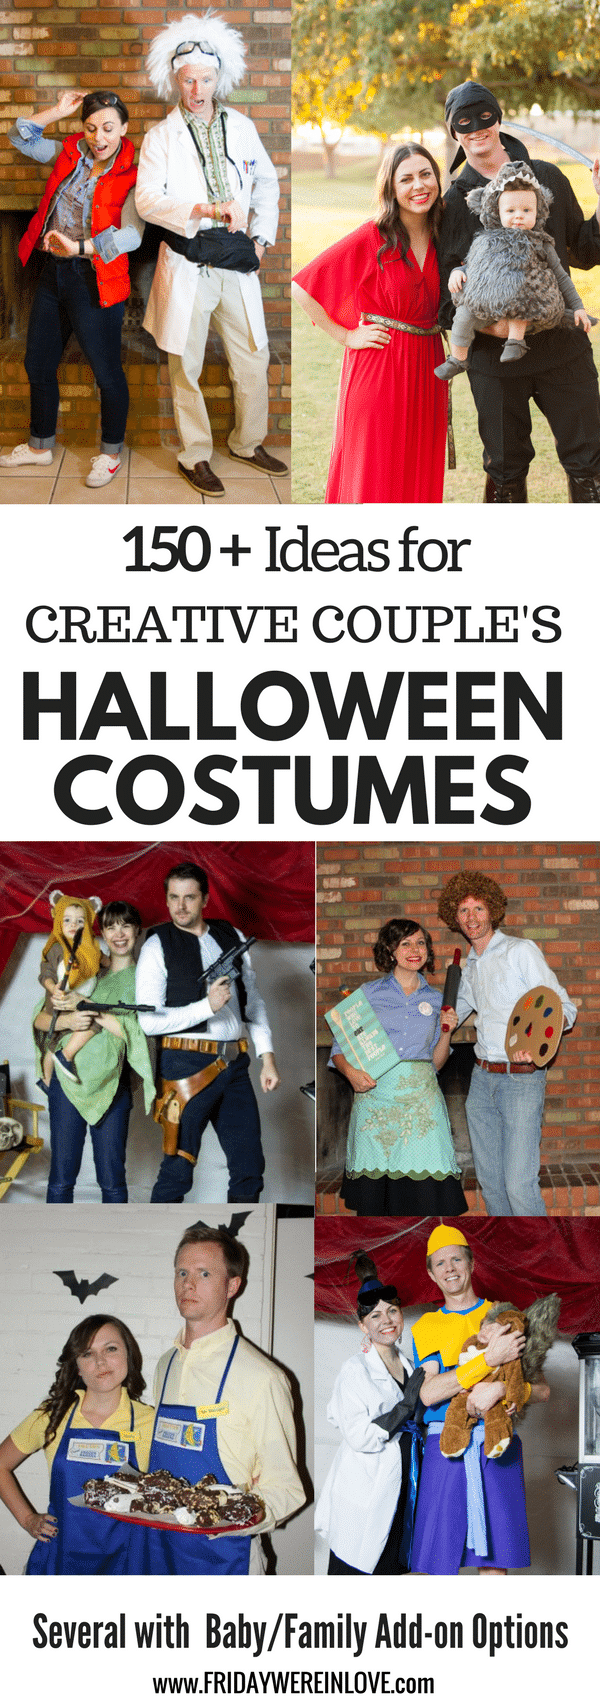 150 plus creative couple's Halloween Costume Ideas, with several that include easy family Halloween Costumes to add a themed family Halloween costume with a baby or young children